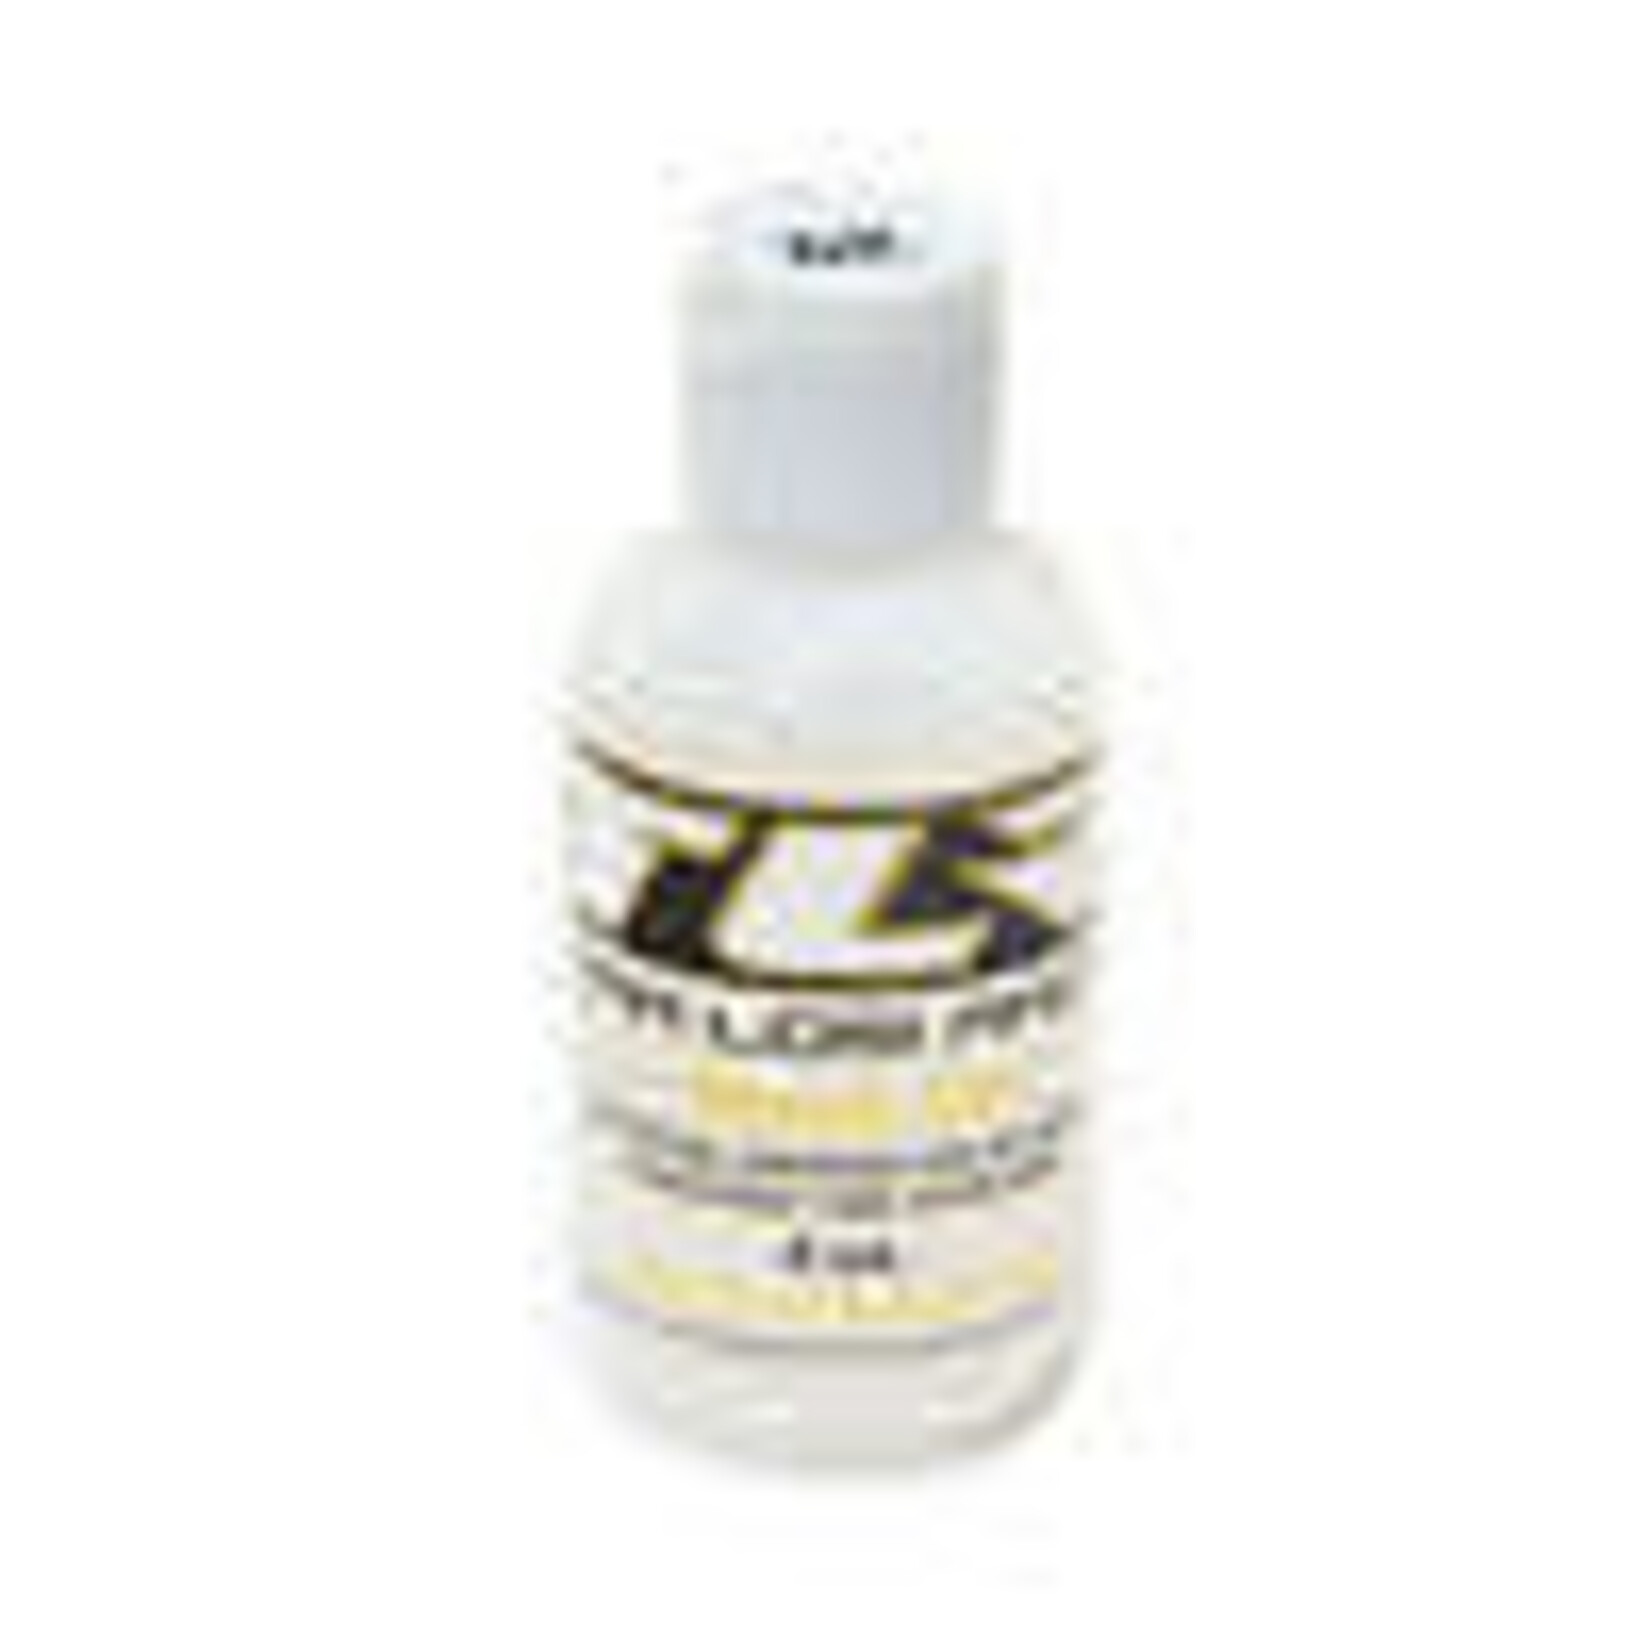 TLR TLR74023  SILICONE SHOCK OIL, 30WT, 338CST, 4OZ